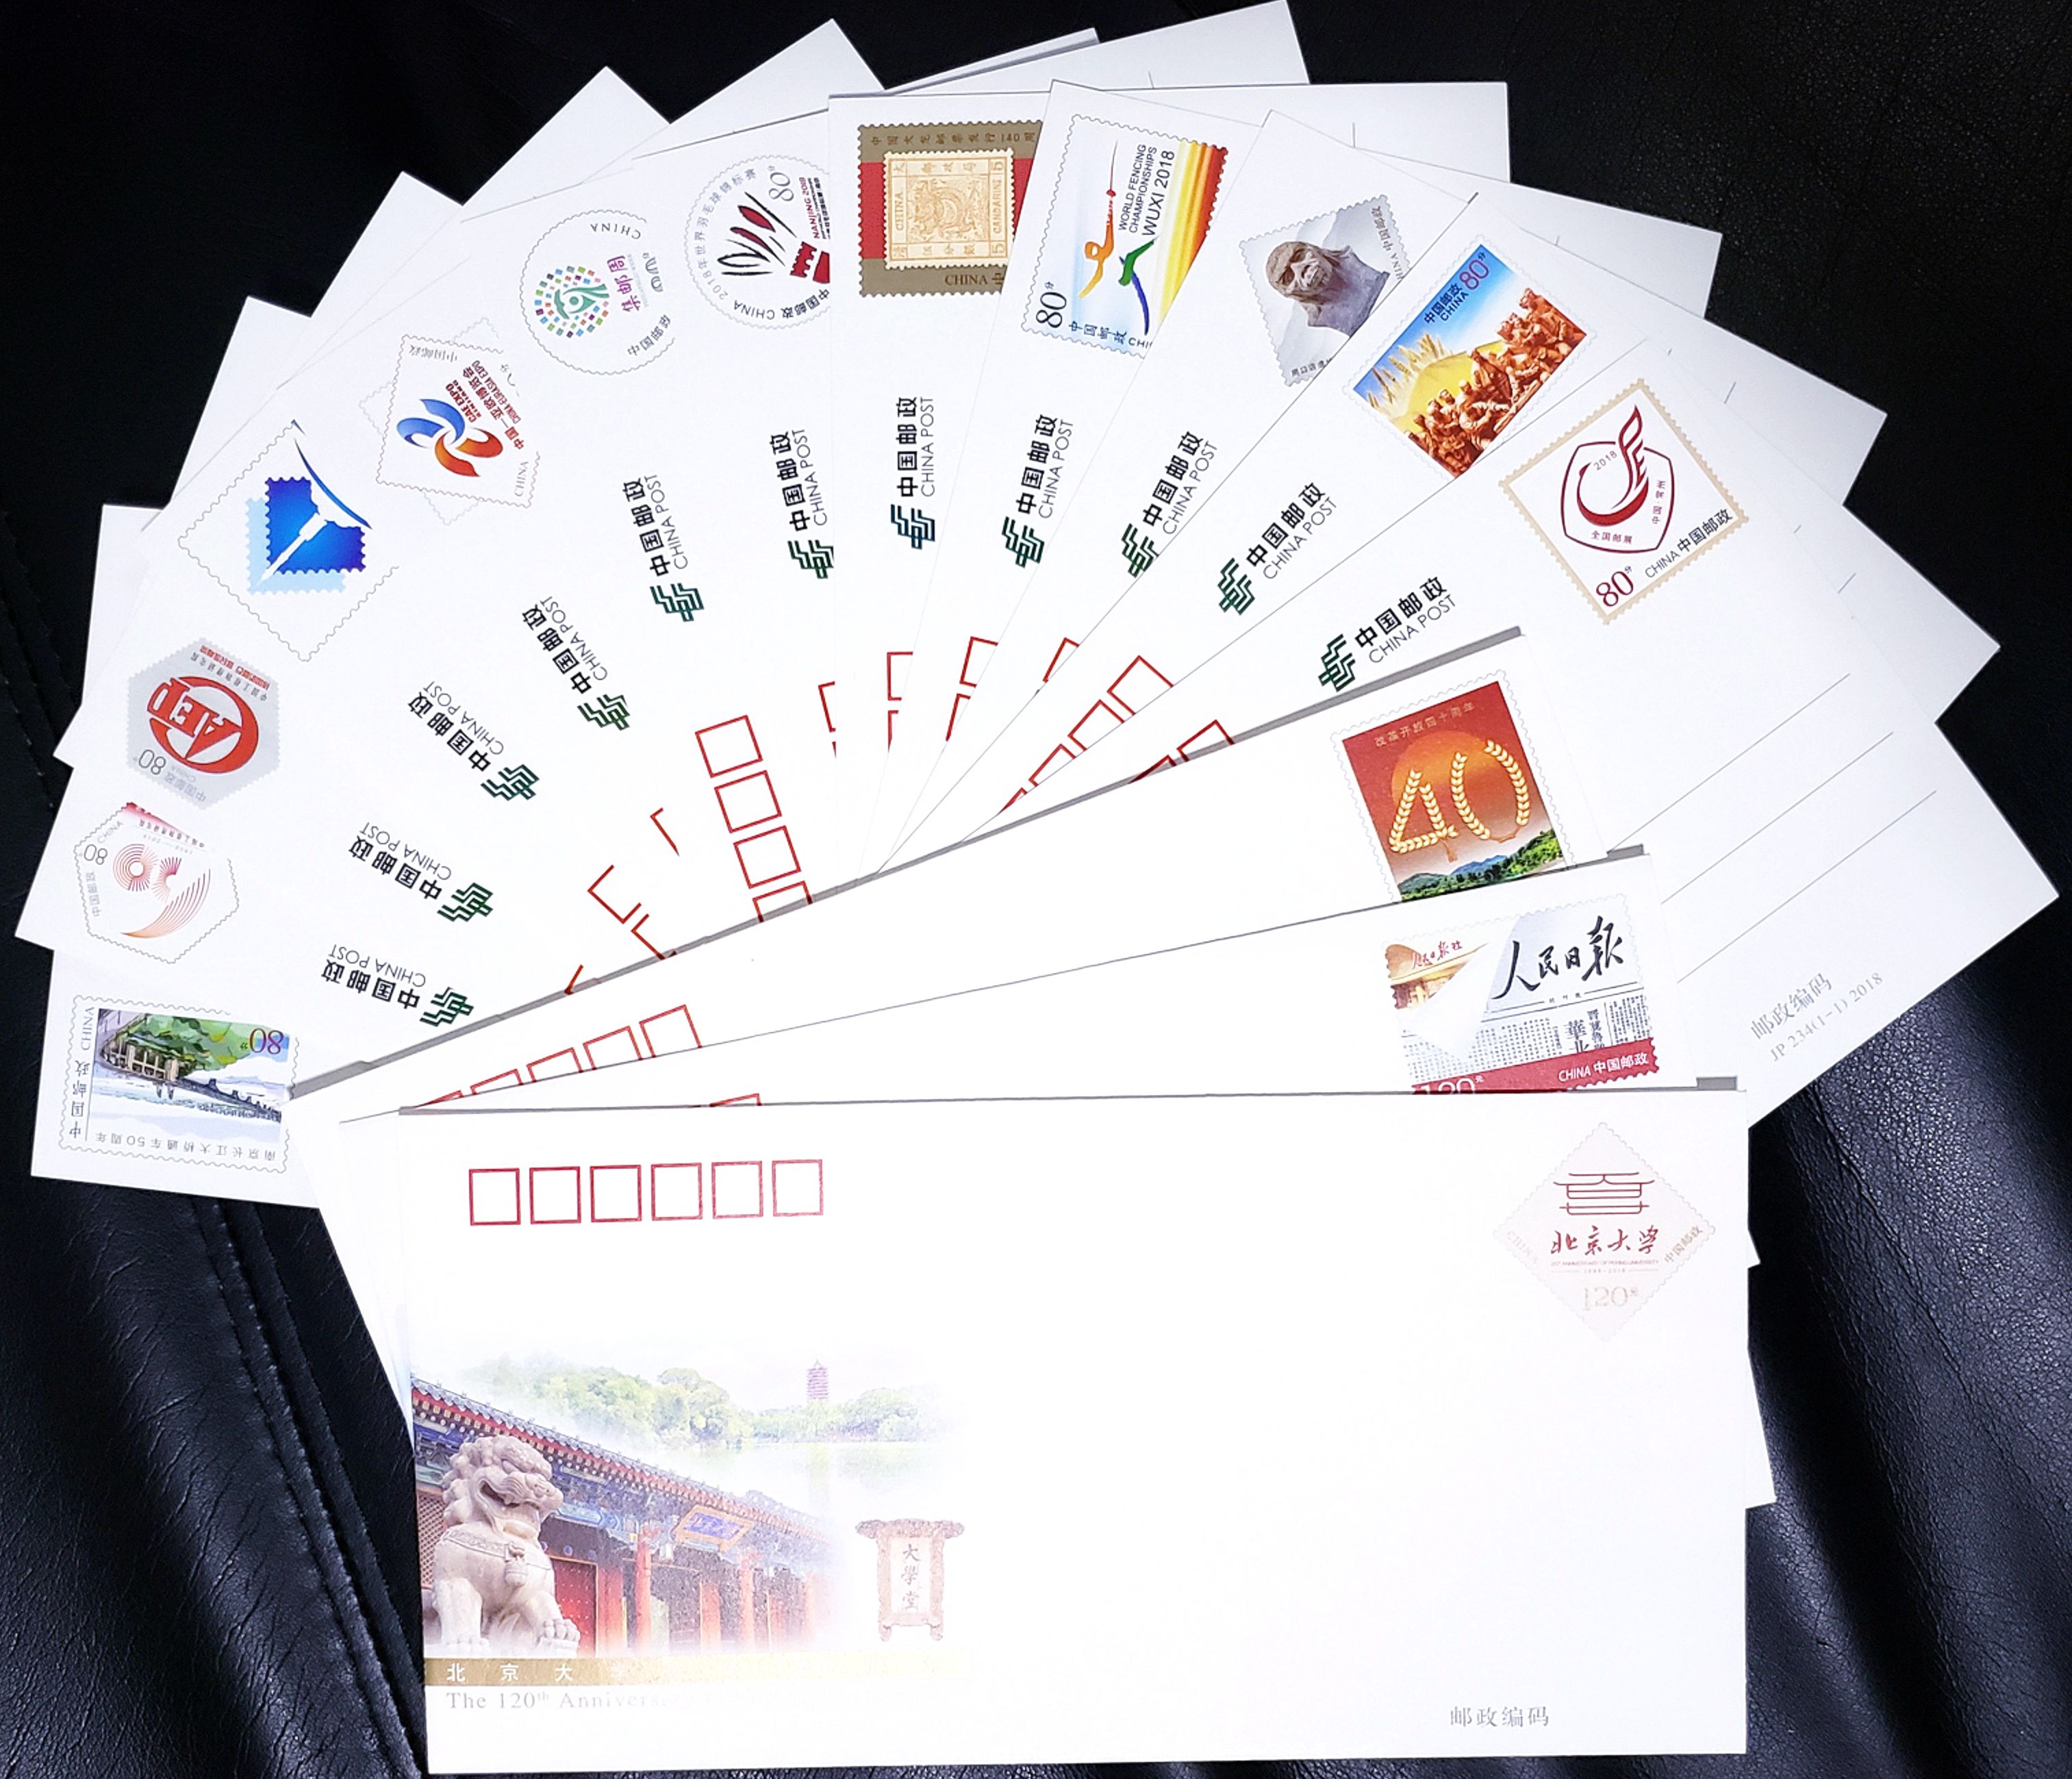 C2018, Complete China 2018 Postal Cards and Envelopes, 15 pcs